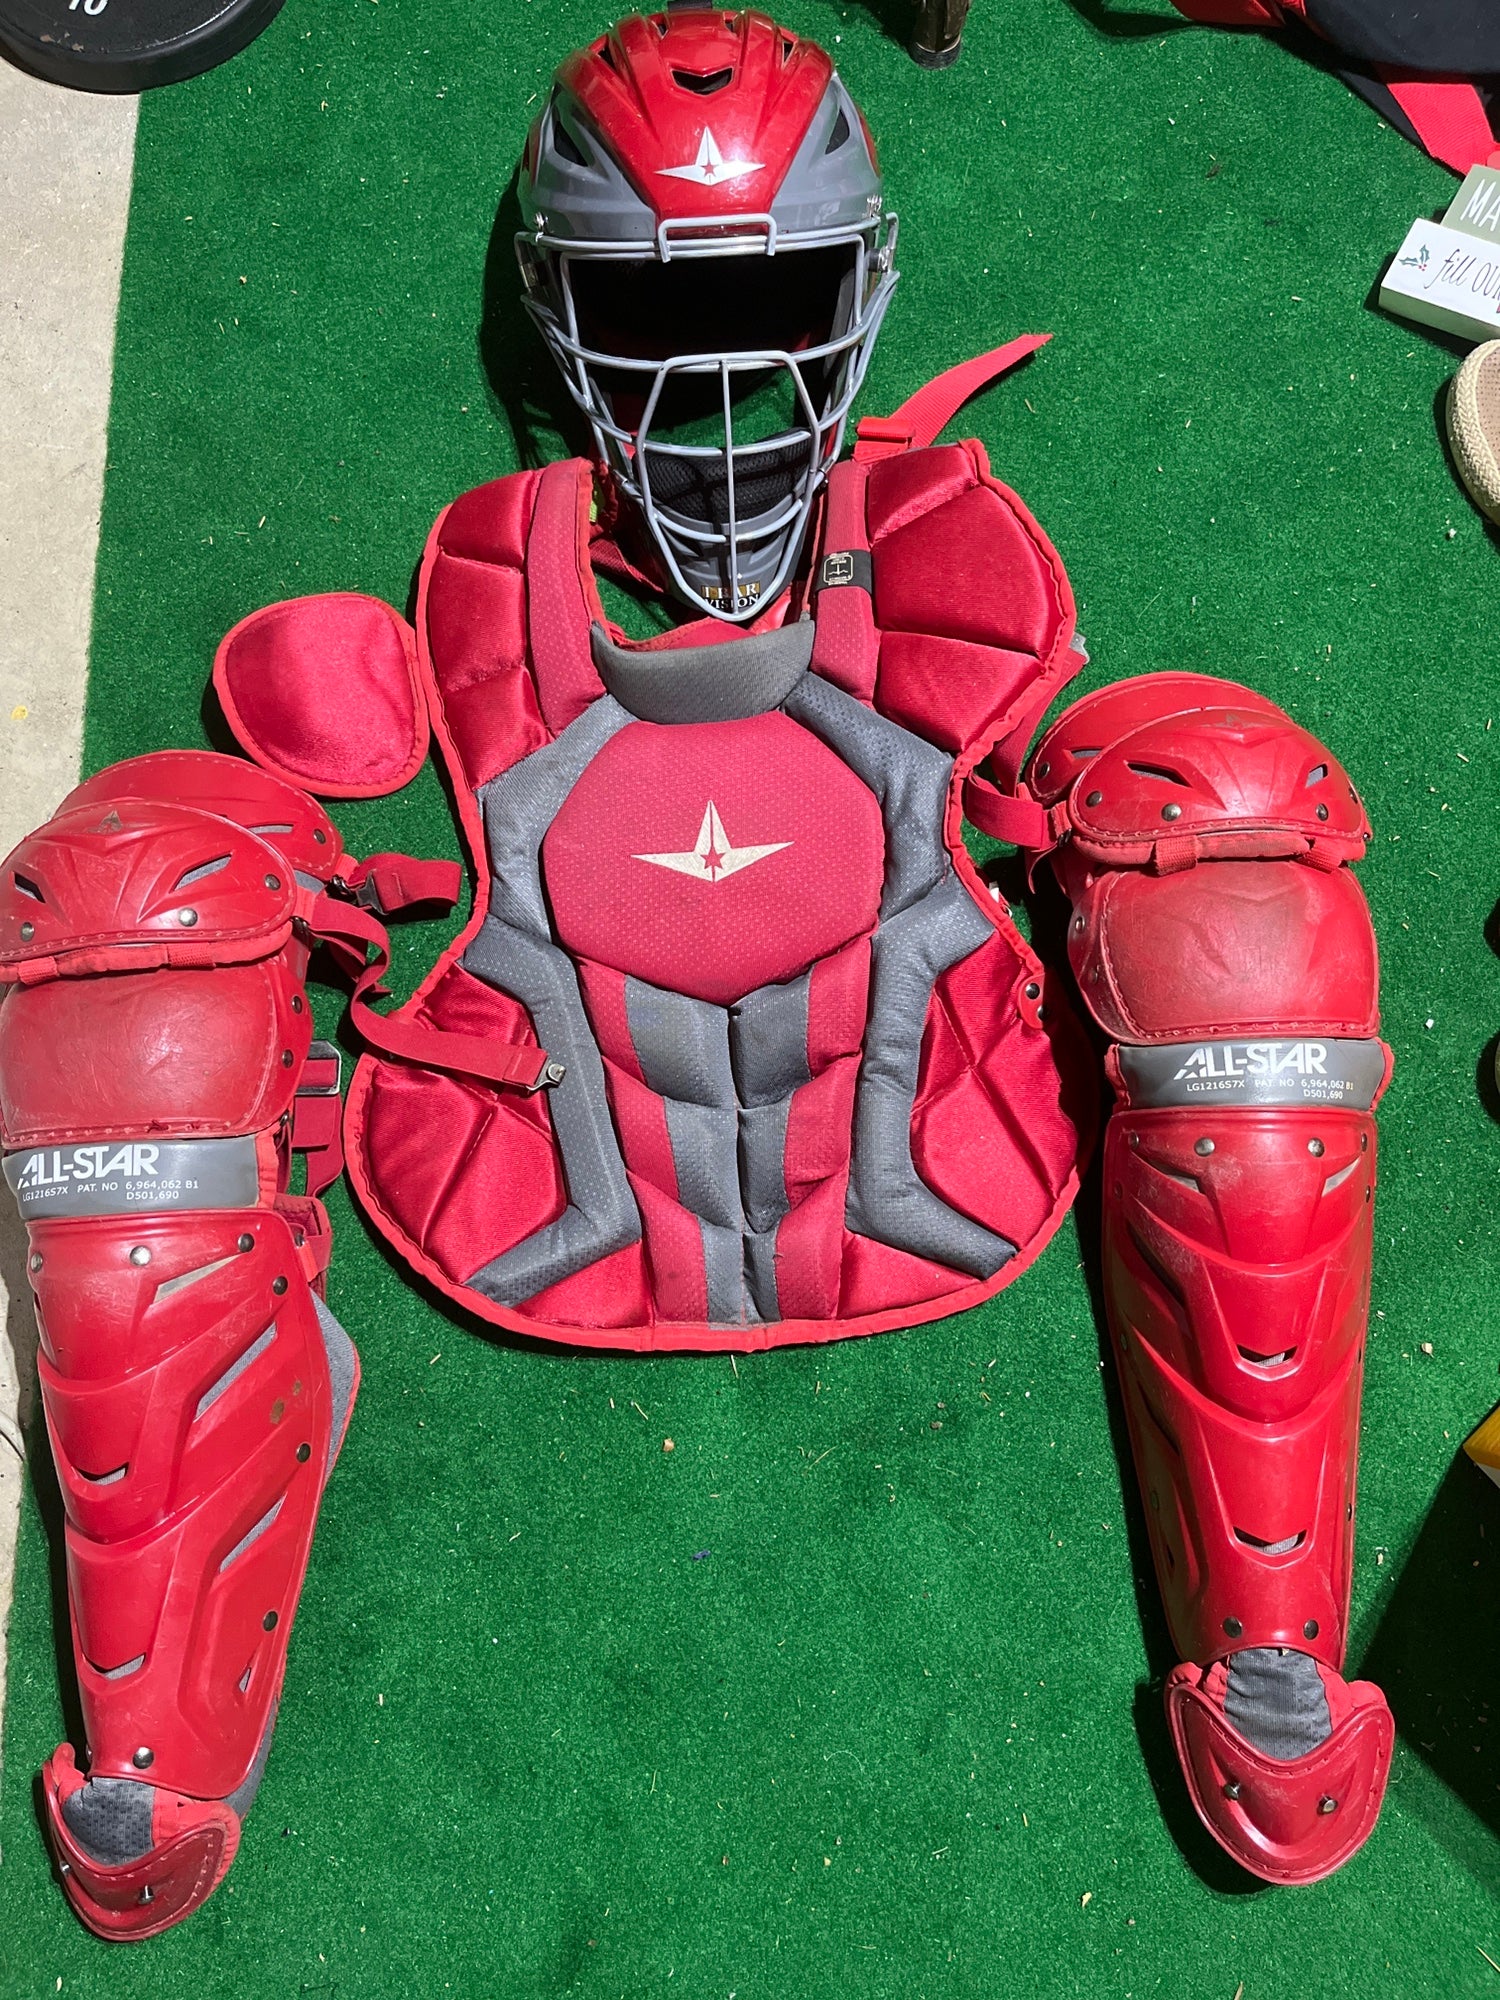 LA Angels Issued All Star System 7 Catcher's Gear - Red